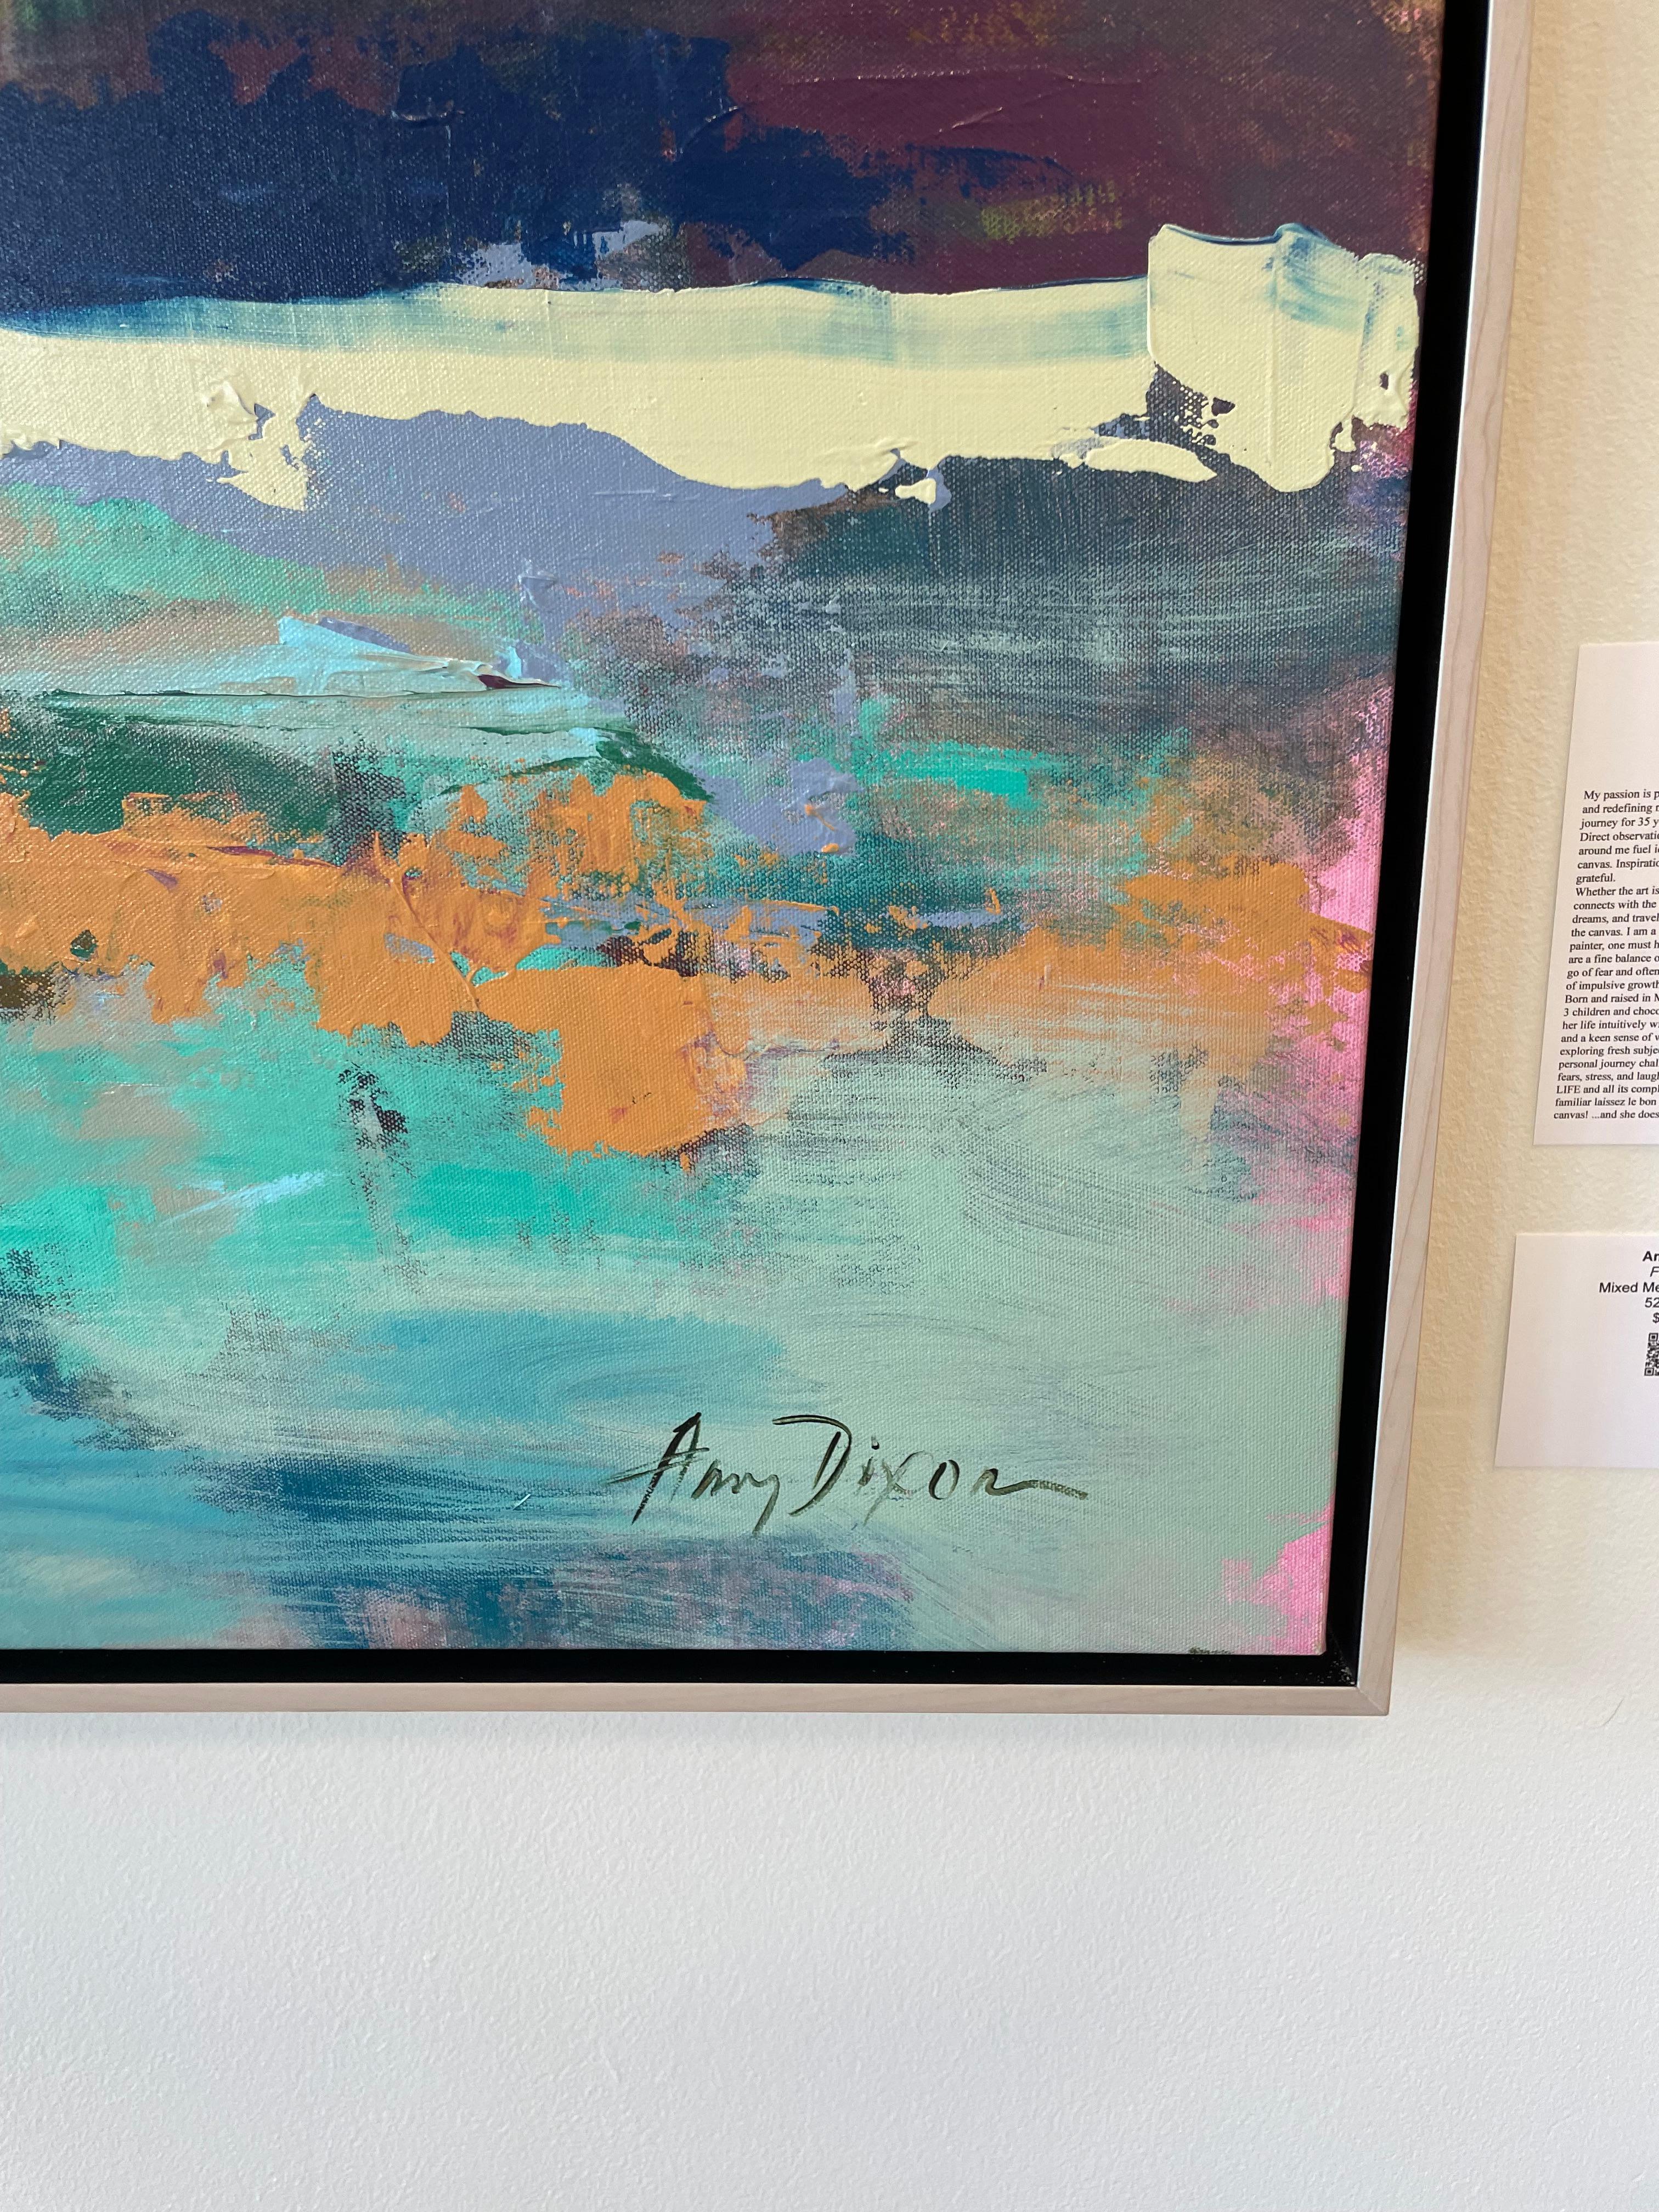 The abstract, multimedia work by Amy Dixon is approximately 52 x 63 inches, and is priced at $7,950. Dixon's signature in on the lower right corner of the painting. 